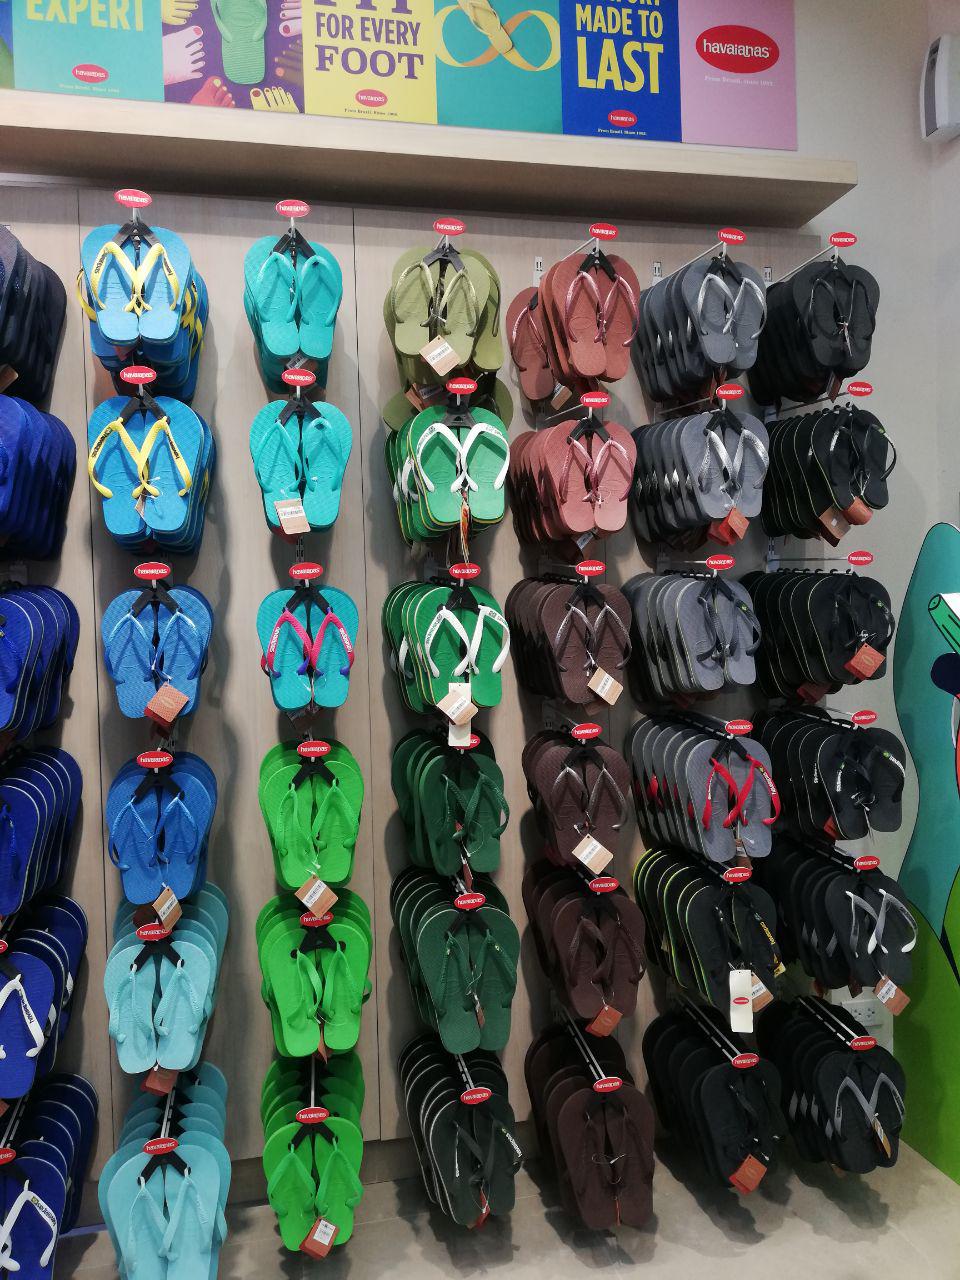 stores that sell havaianas